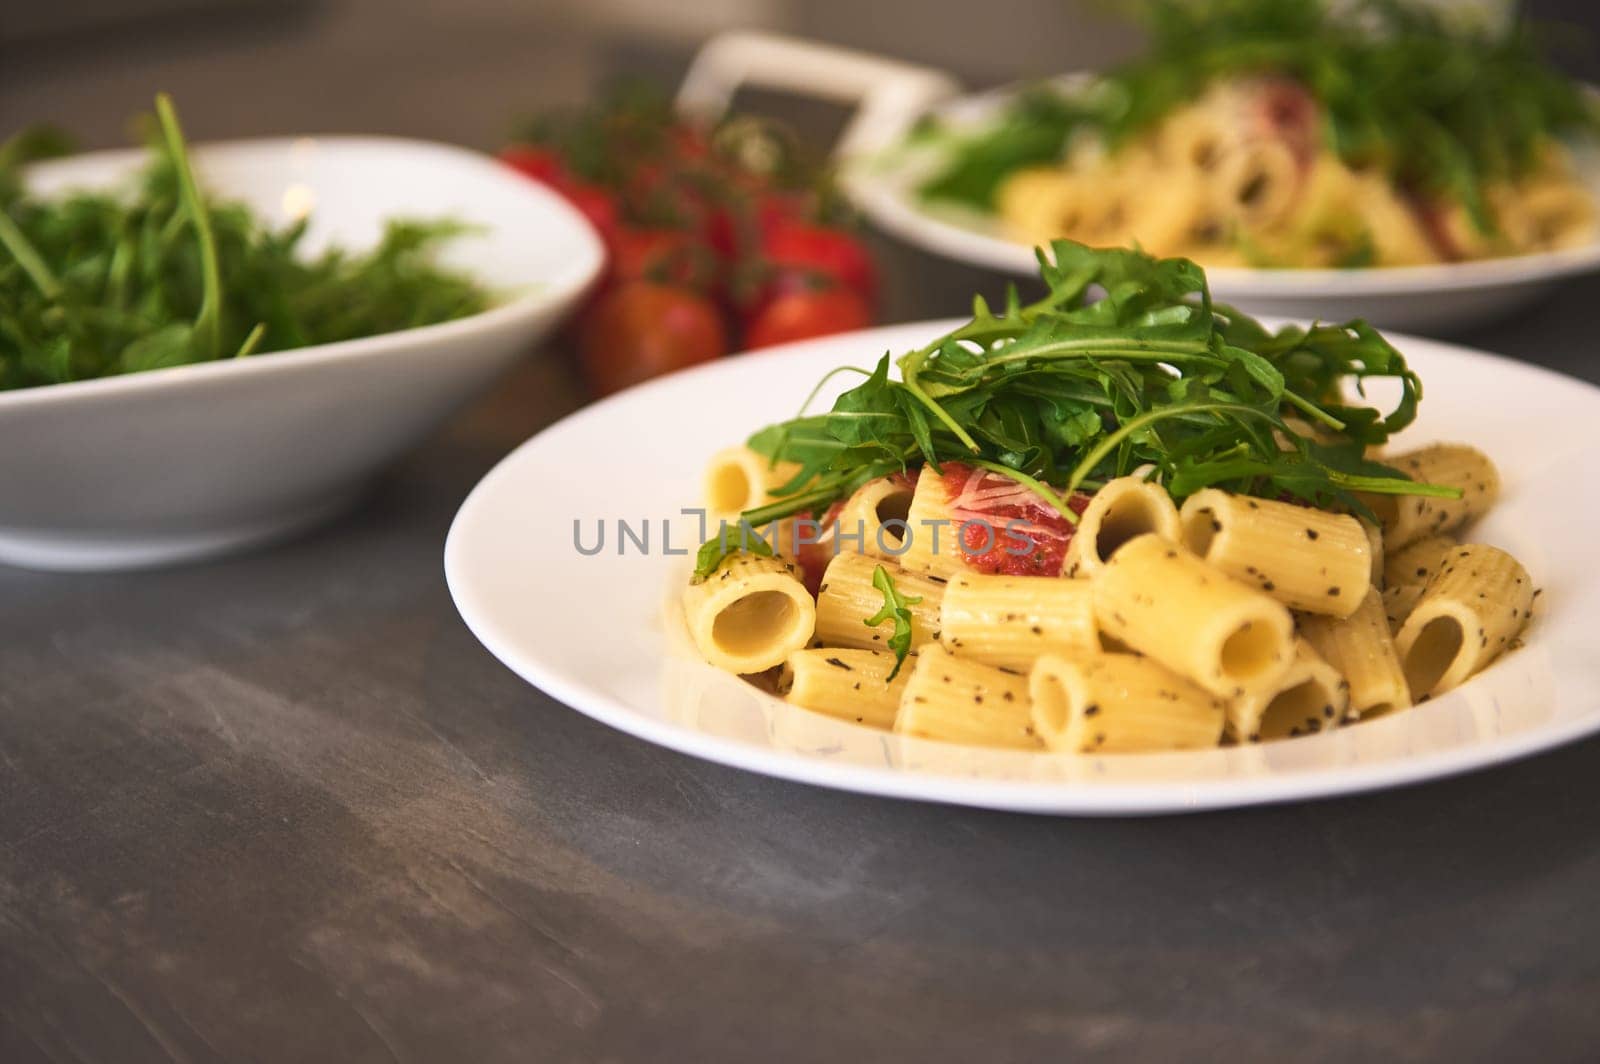 Homemade Italian penne pasta with sauce, tomatoes, arugula, basil and parmesan. Traditional Italian cuisine. Served on a dark table with a branch of organic cherry tomatoes on blurred background. by artgf